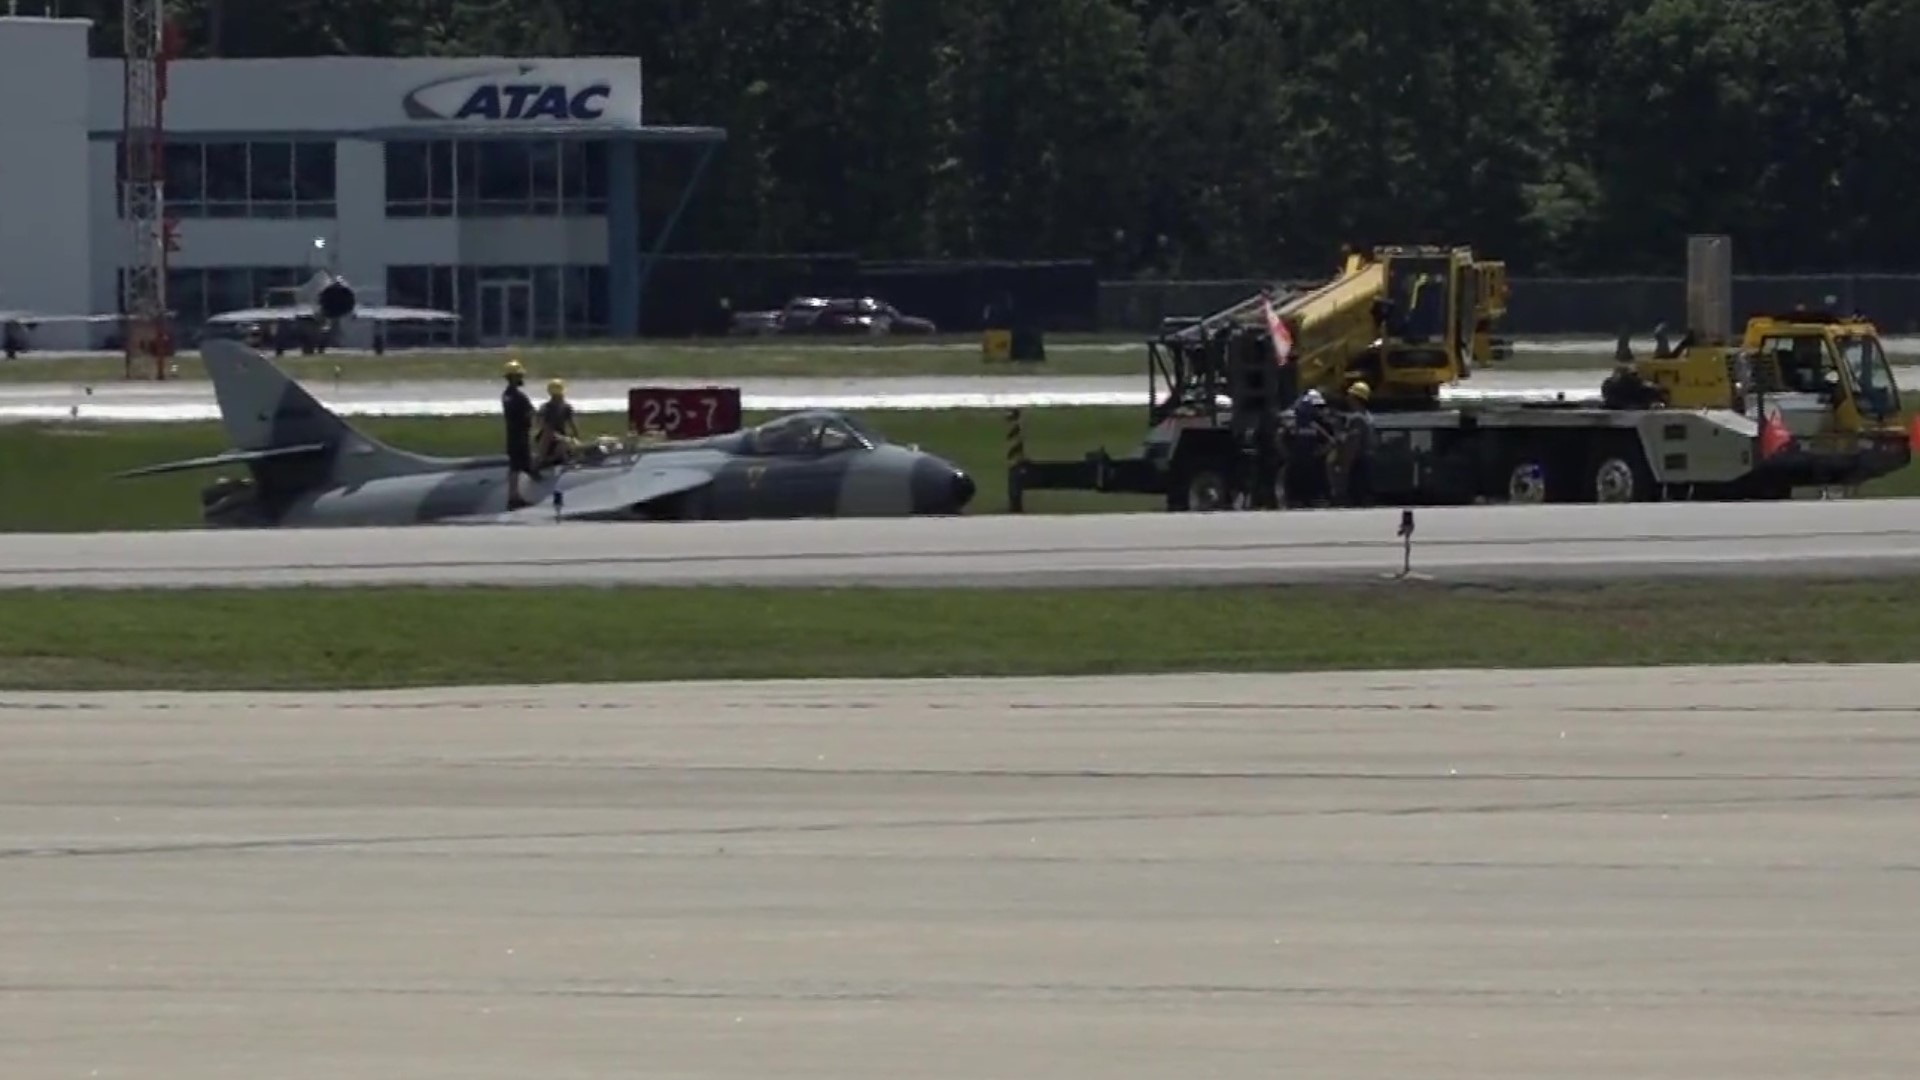 An Airborne Tactical Advantage Company (ATAC) jet went off the runway during an emergency landing at Newport News/Williamsburg International Airport on Thursday morning.